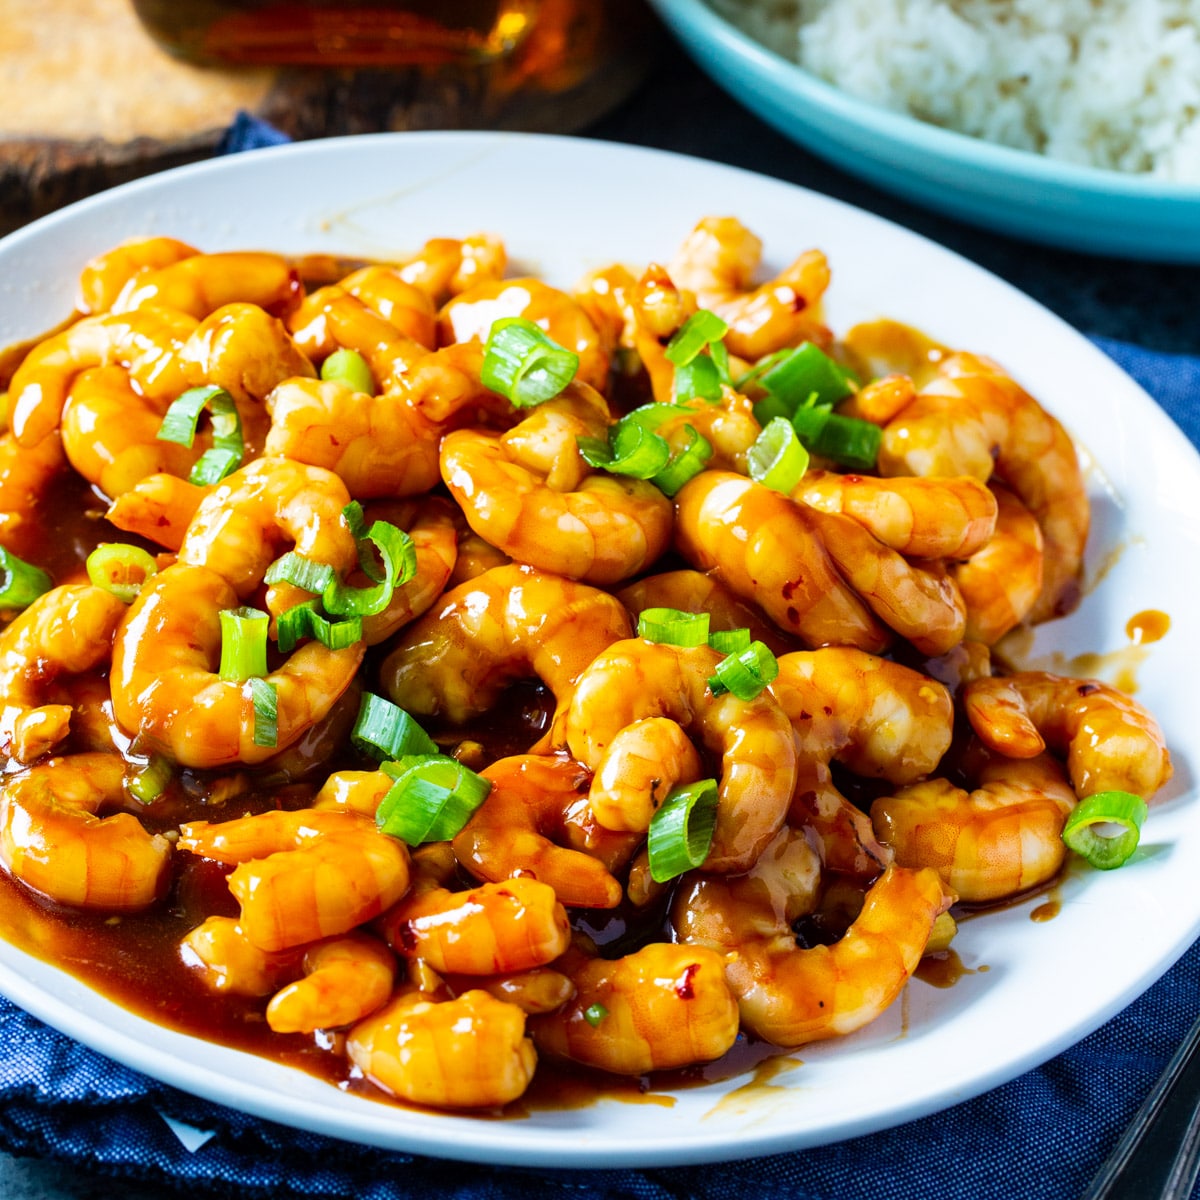 Bourbon Shrimp topped with sliced green onions on a plate.